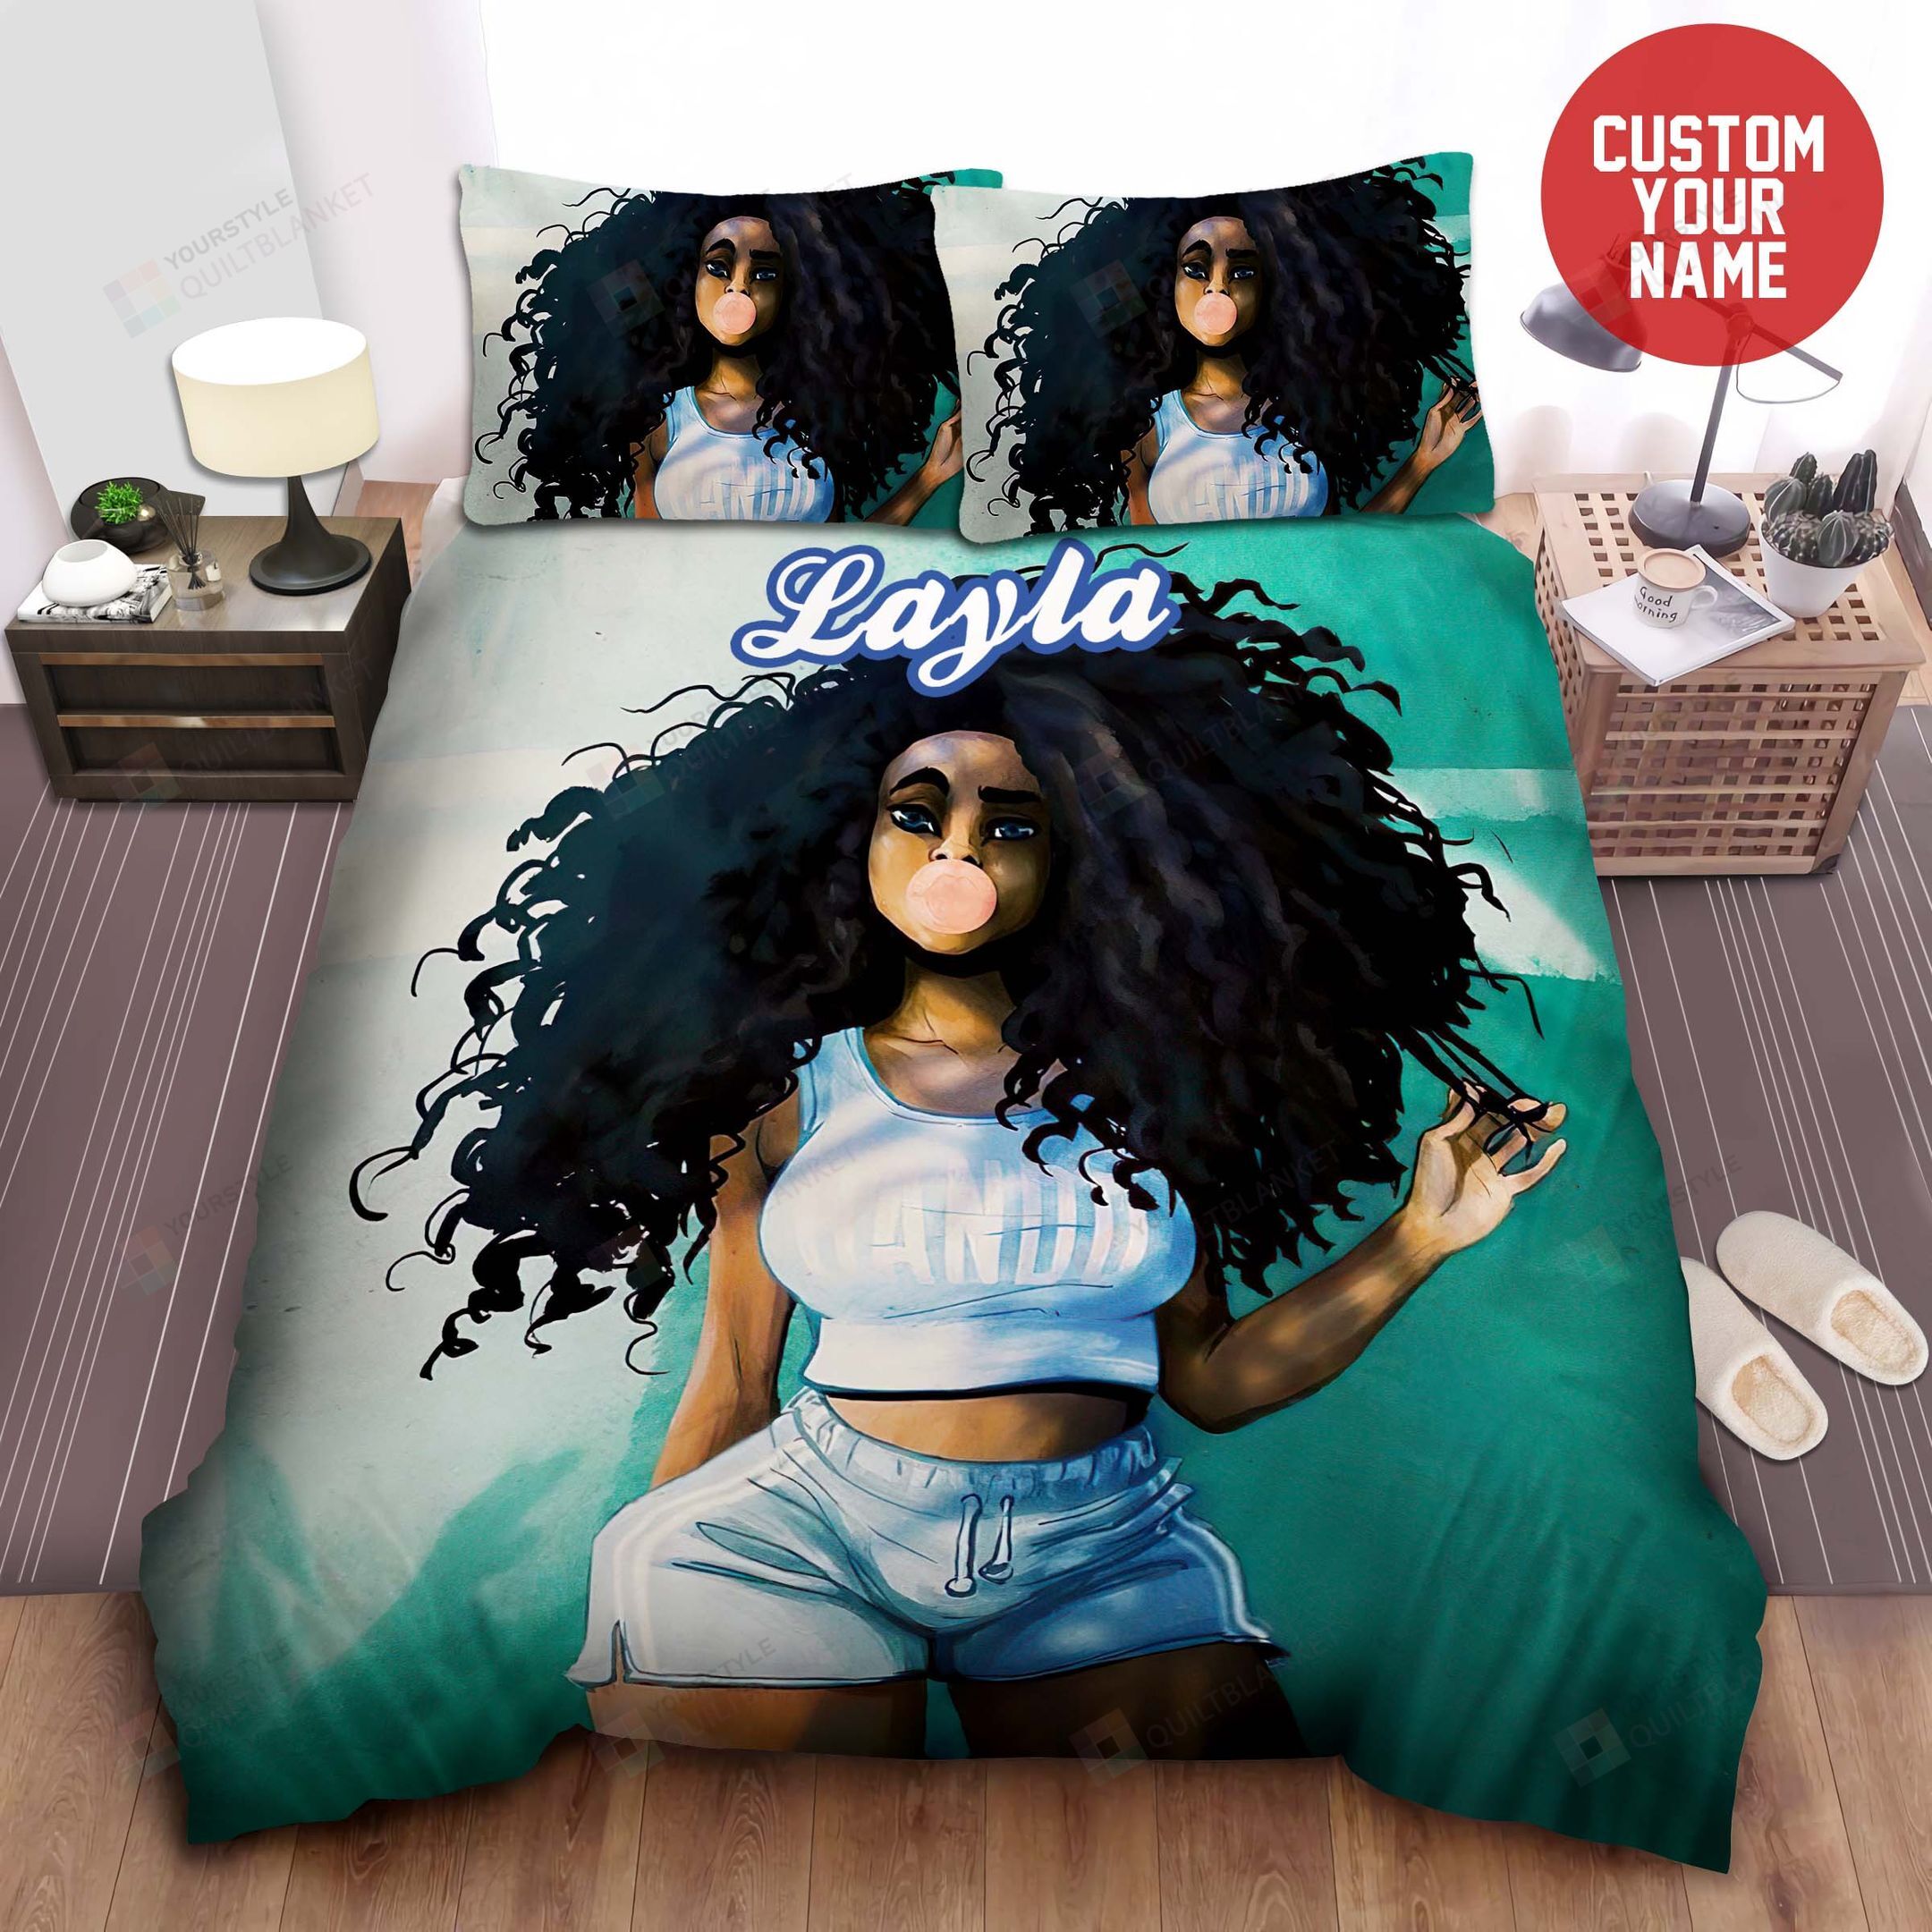 Natural Hair Style Black Girl Afican American Woman Custom Name Cotton Bed Sheets Duvet Cover Bedding Sets